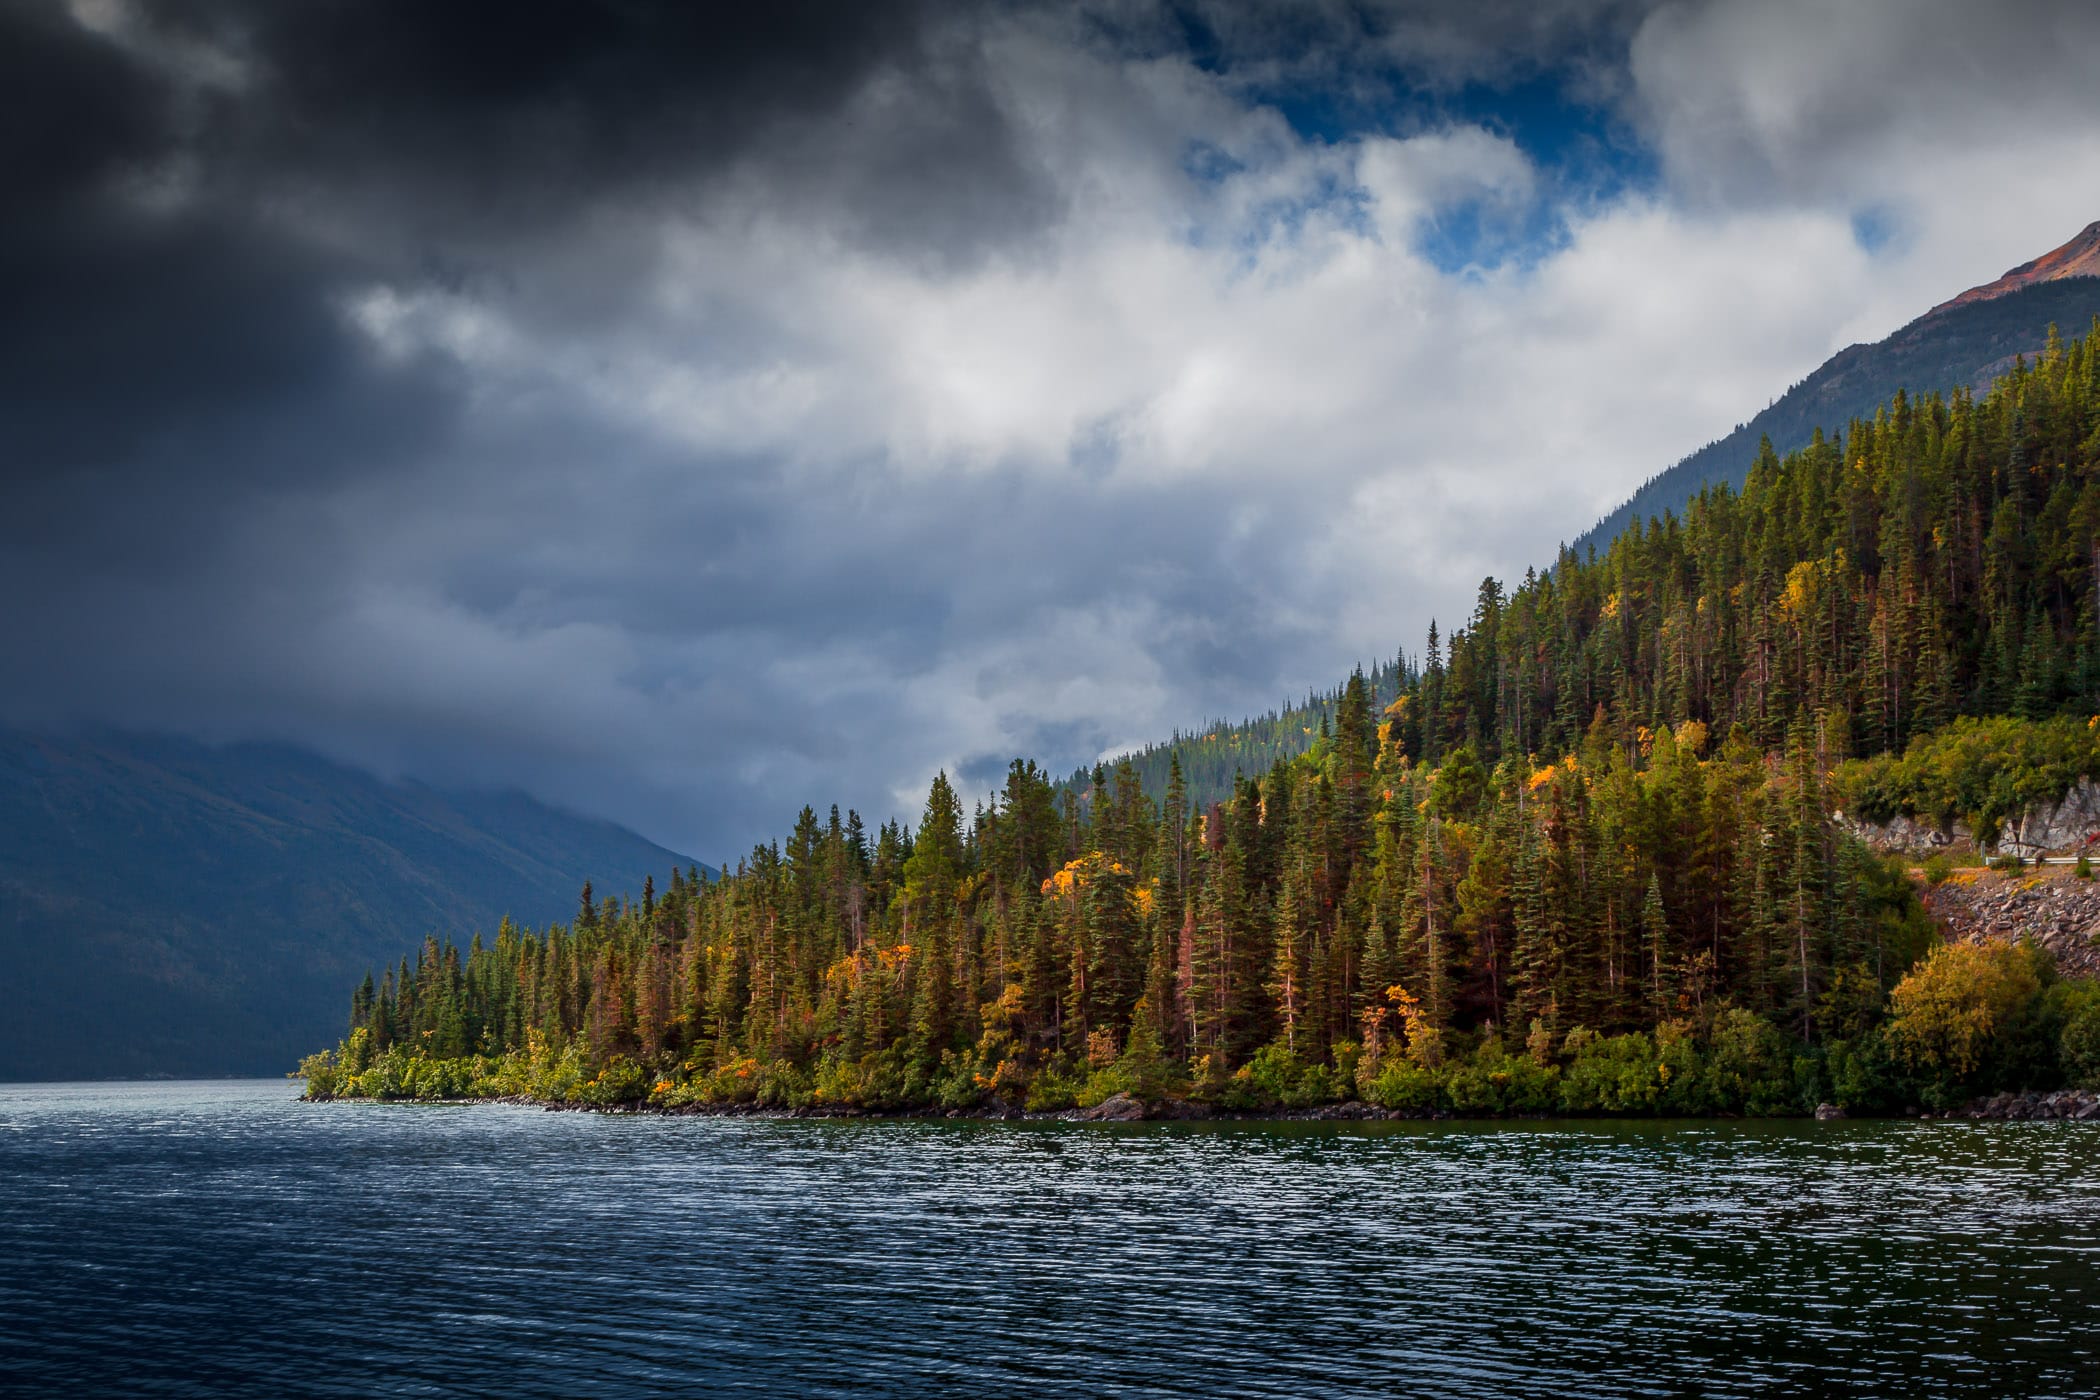 Low storm clouds roll in over the mountains surrounding British Columbia, Canada’s Tutshi Lake.